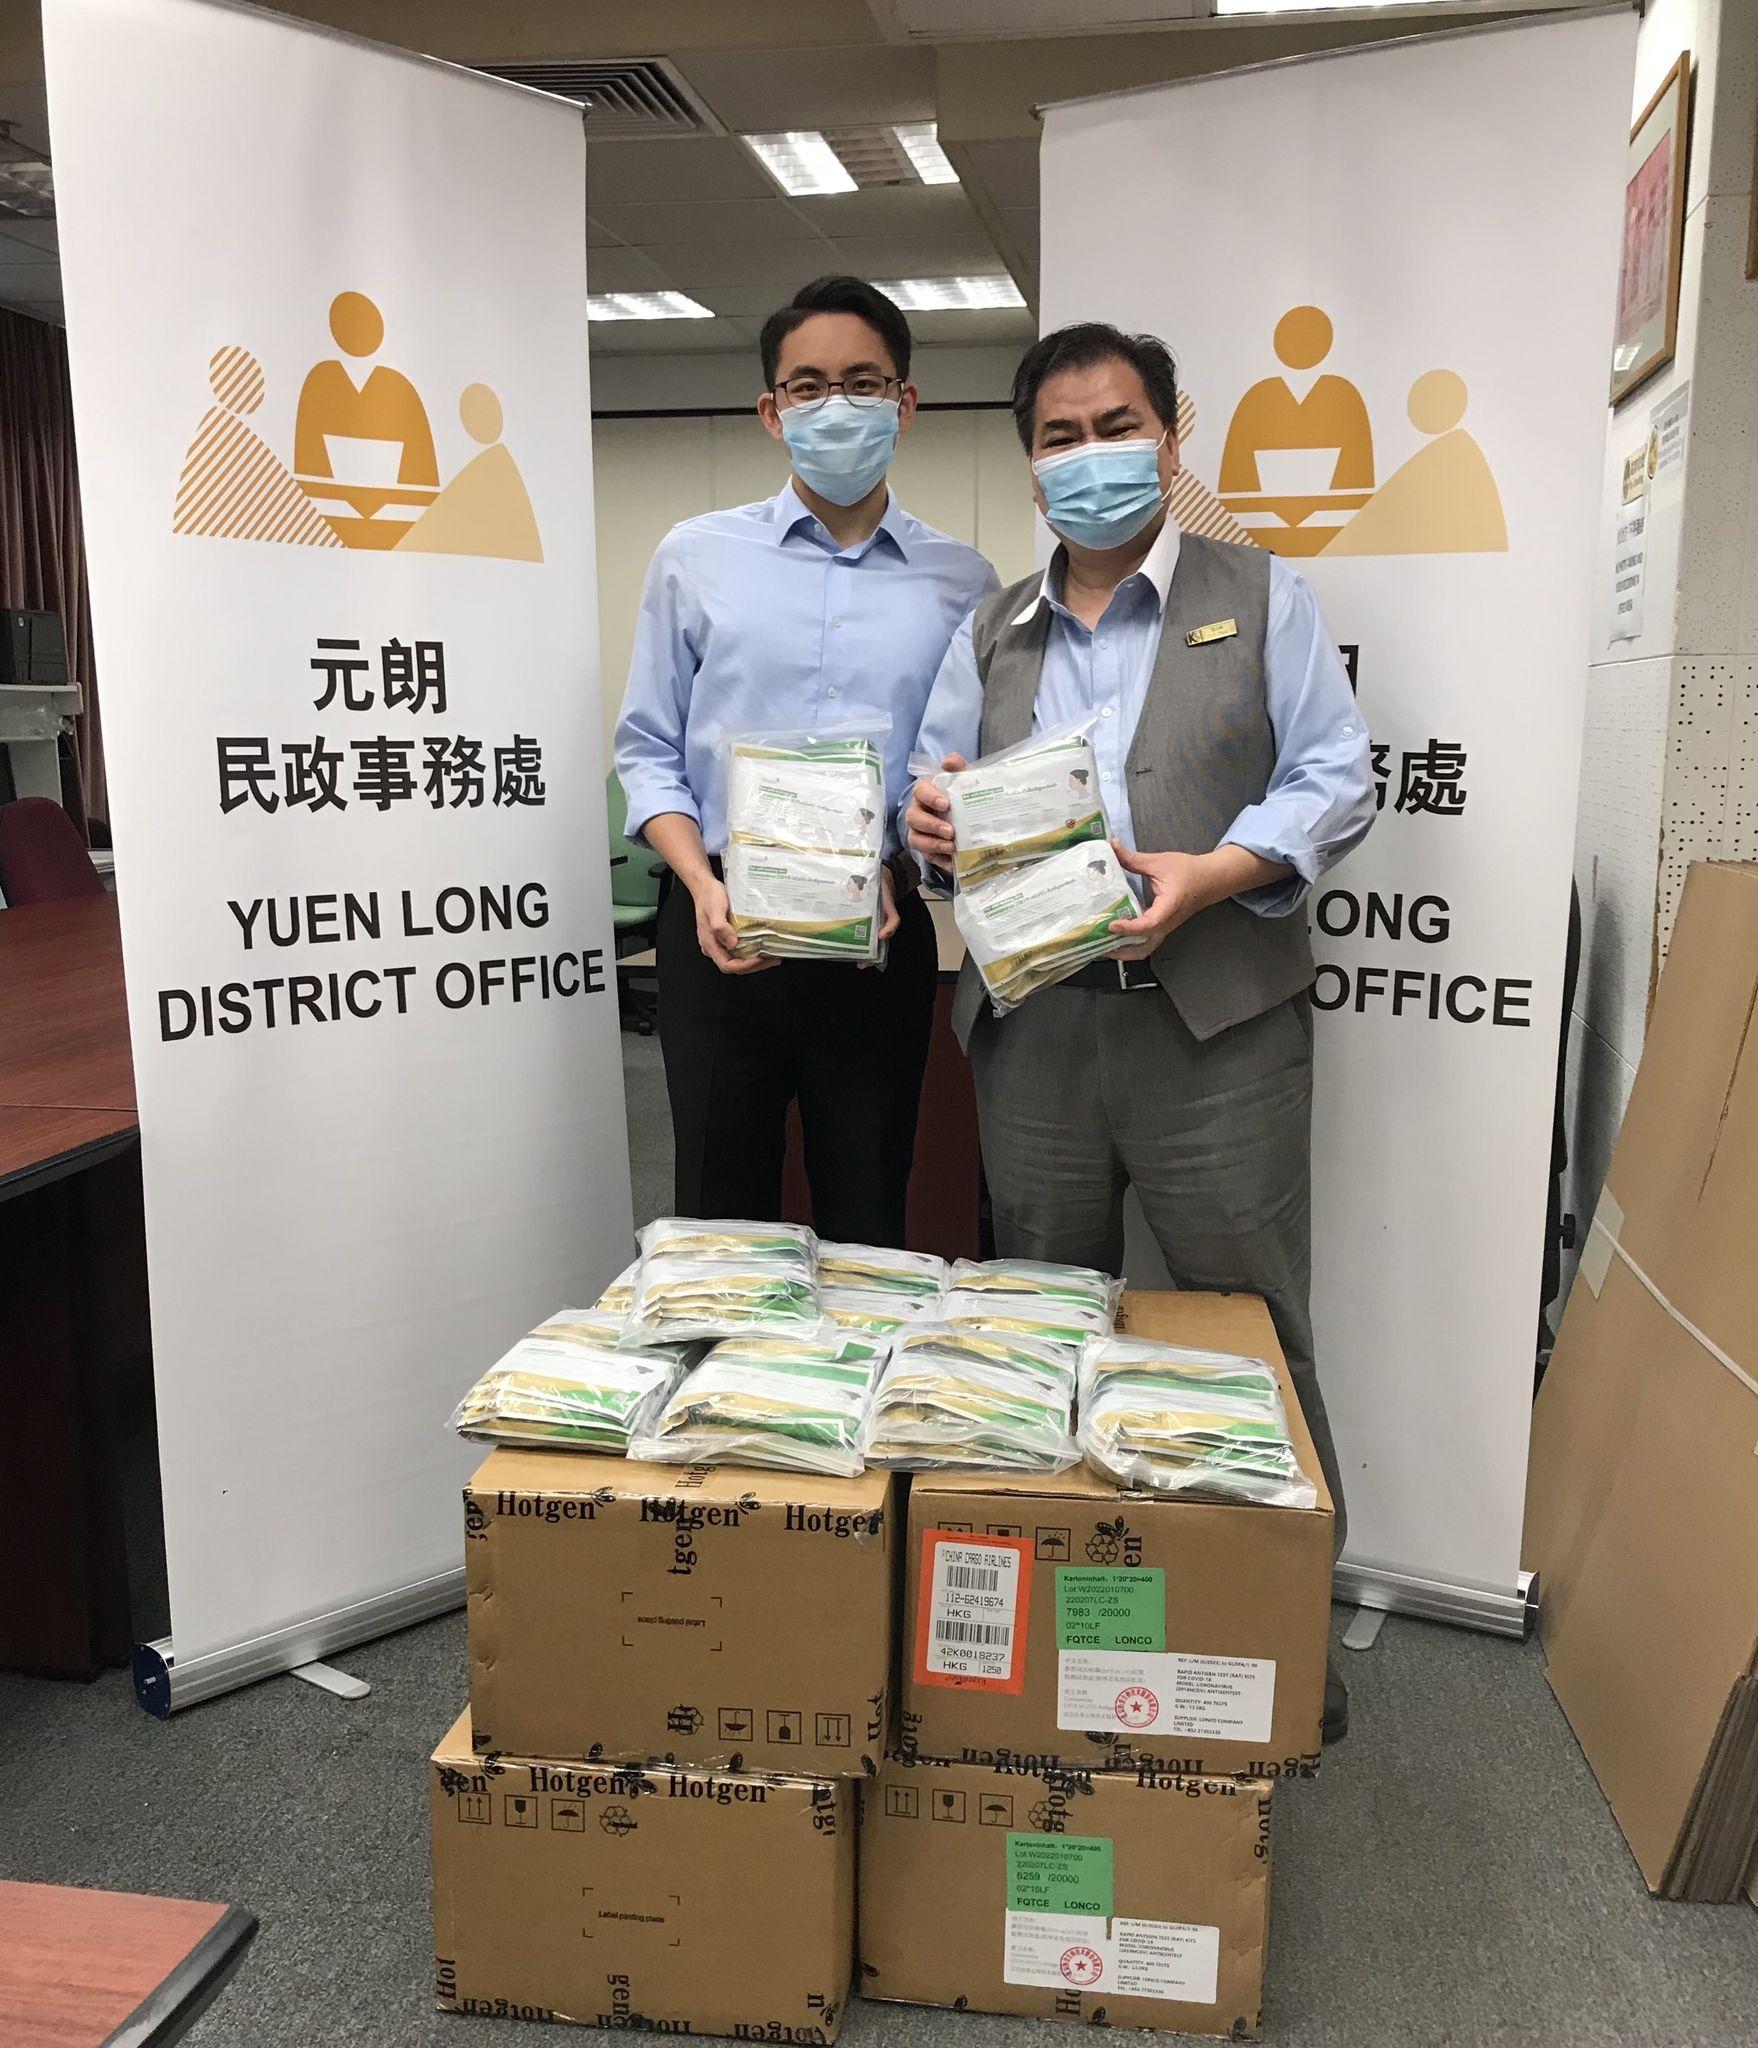 The Yuen Long District Office today (March 7) distributed COVID-19 rapid test kits to households, cleansing workers and property management staff living and working in Sun Yuen Long Centre for voluntary testing through the property management company.